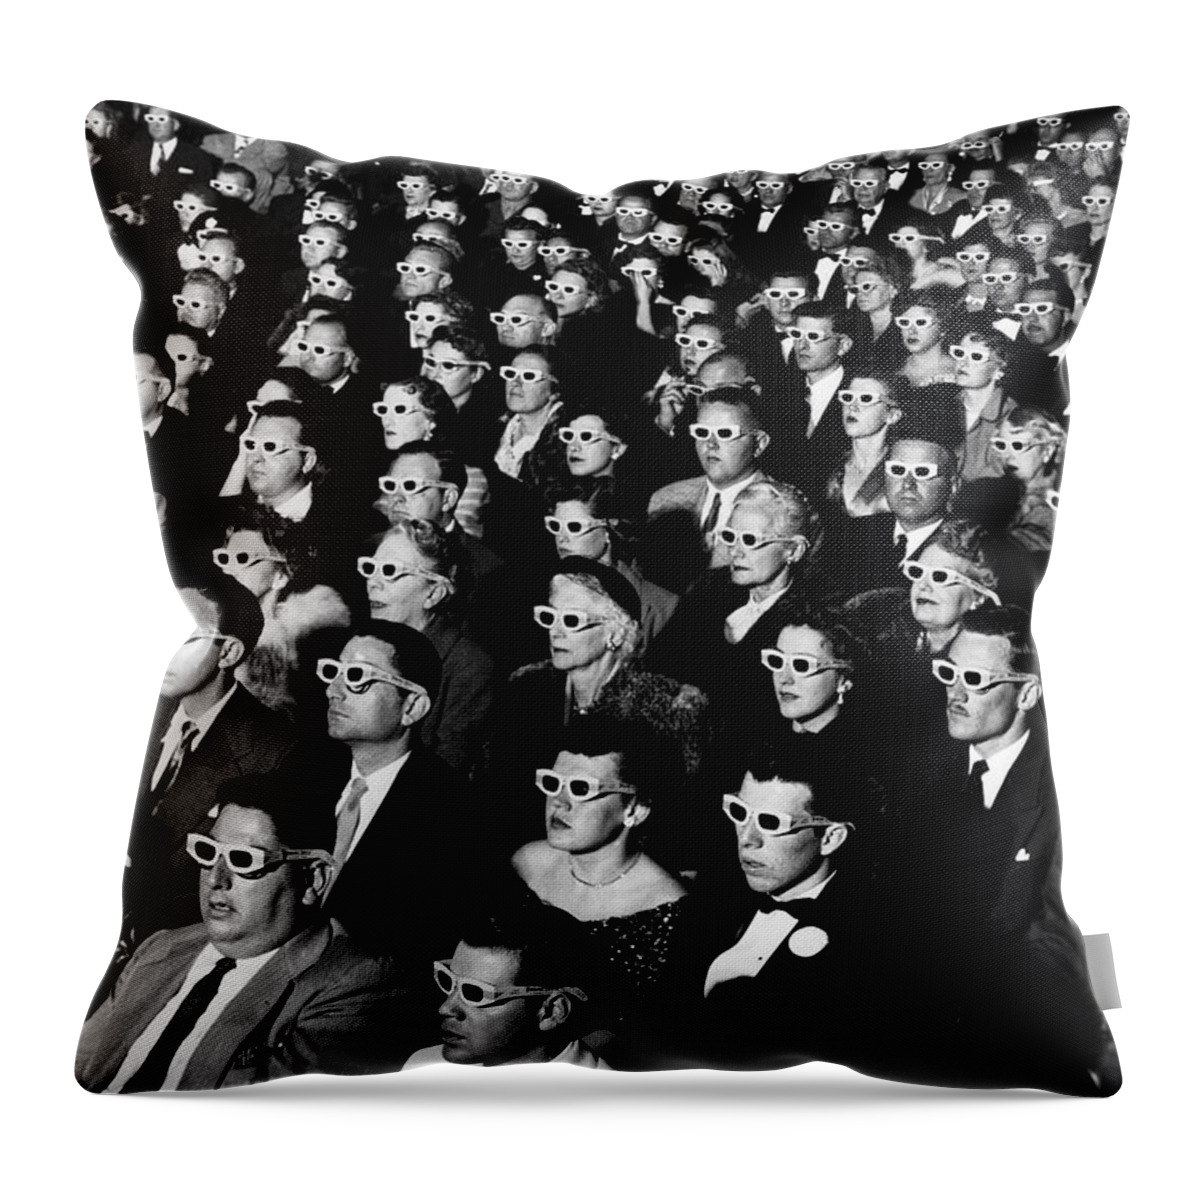 3d Glasses Throw Pillow featuring the photograph 3D Film Audience #2 by JR Eyerman